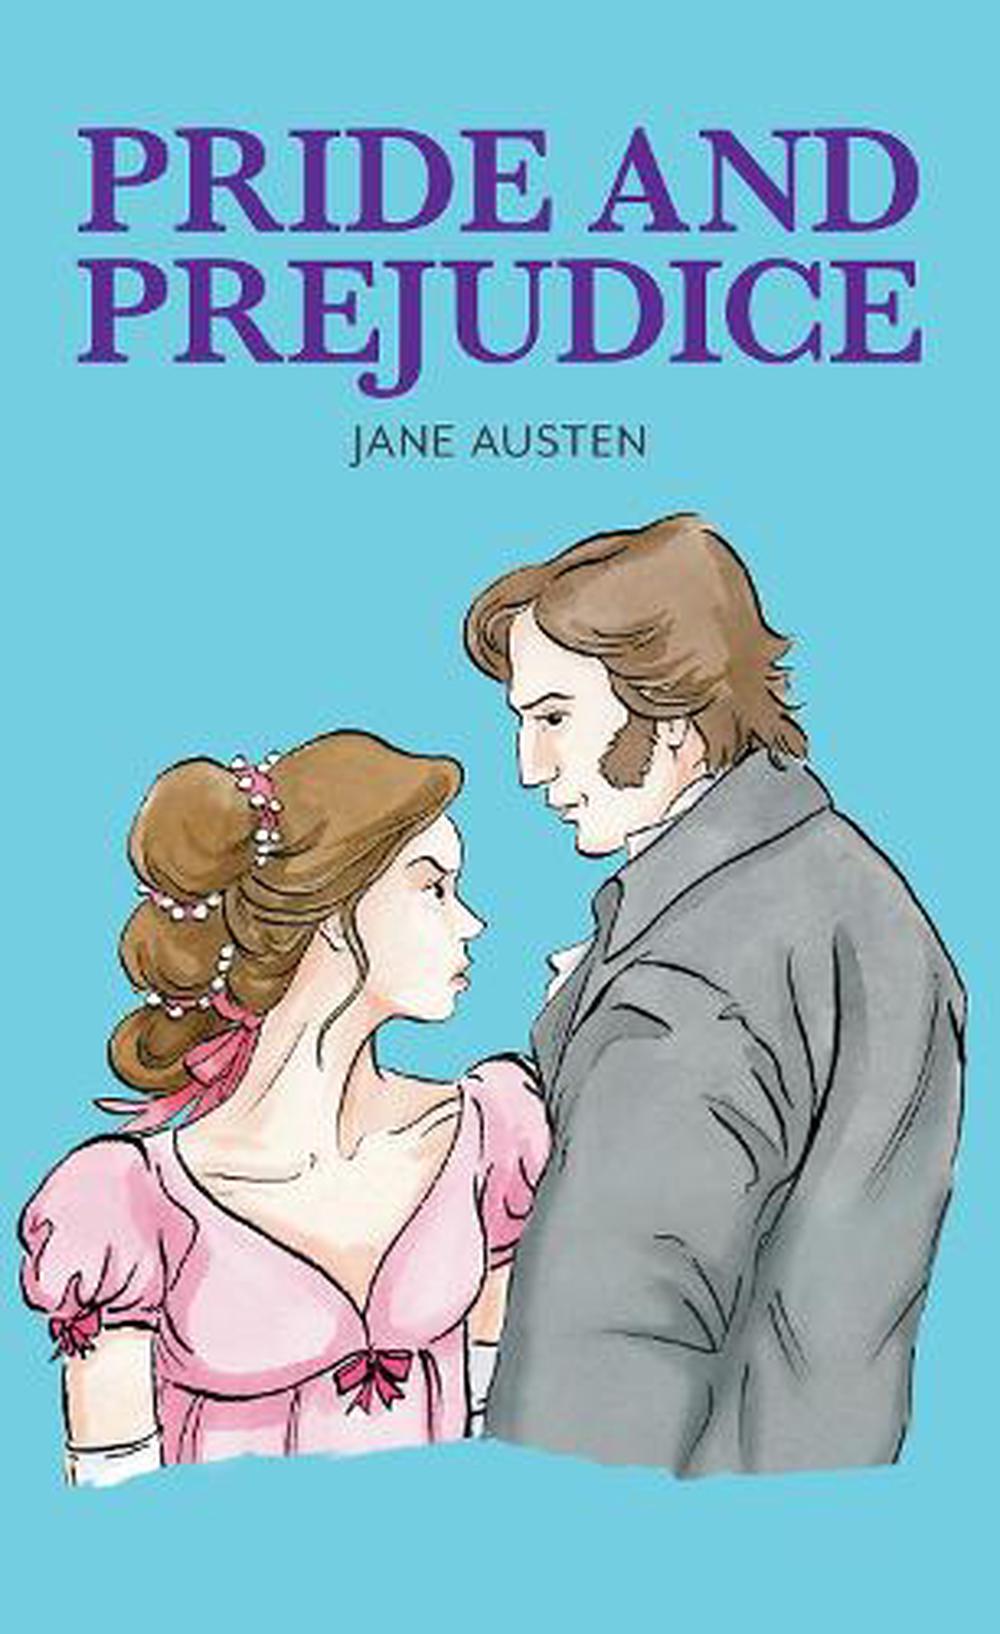 introduction of pride and prejudice essay